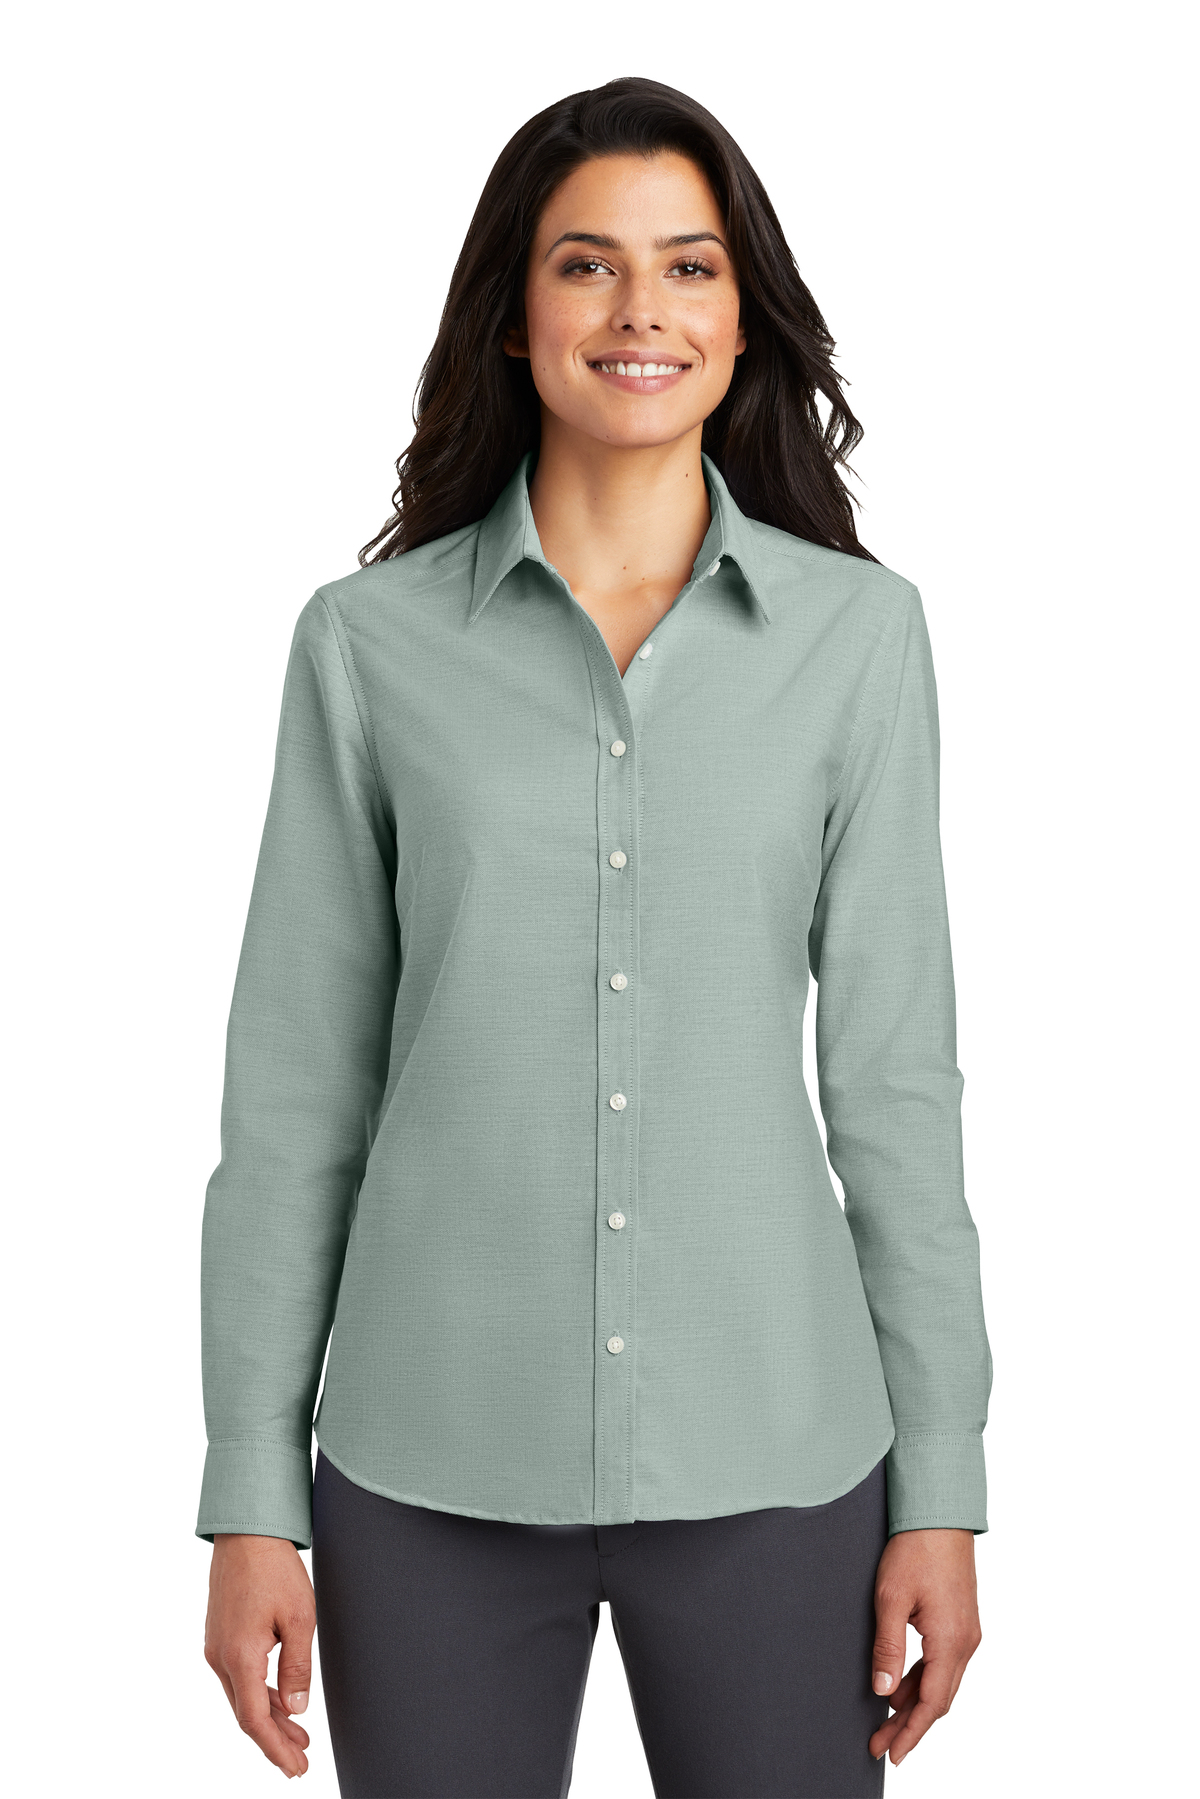 Port Authority ® Ladies SuperPro ™ Oxford Shirt | Product | Company Casuals